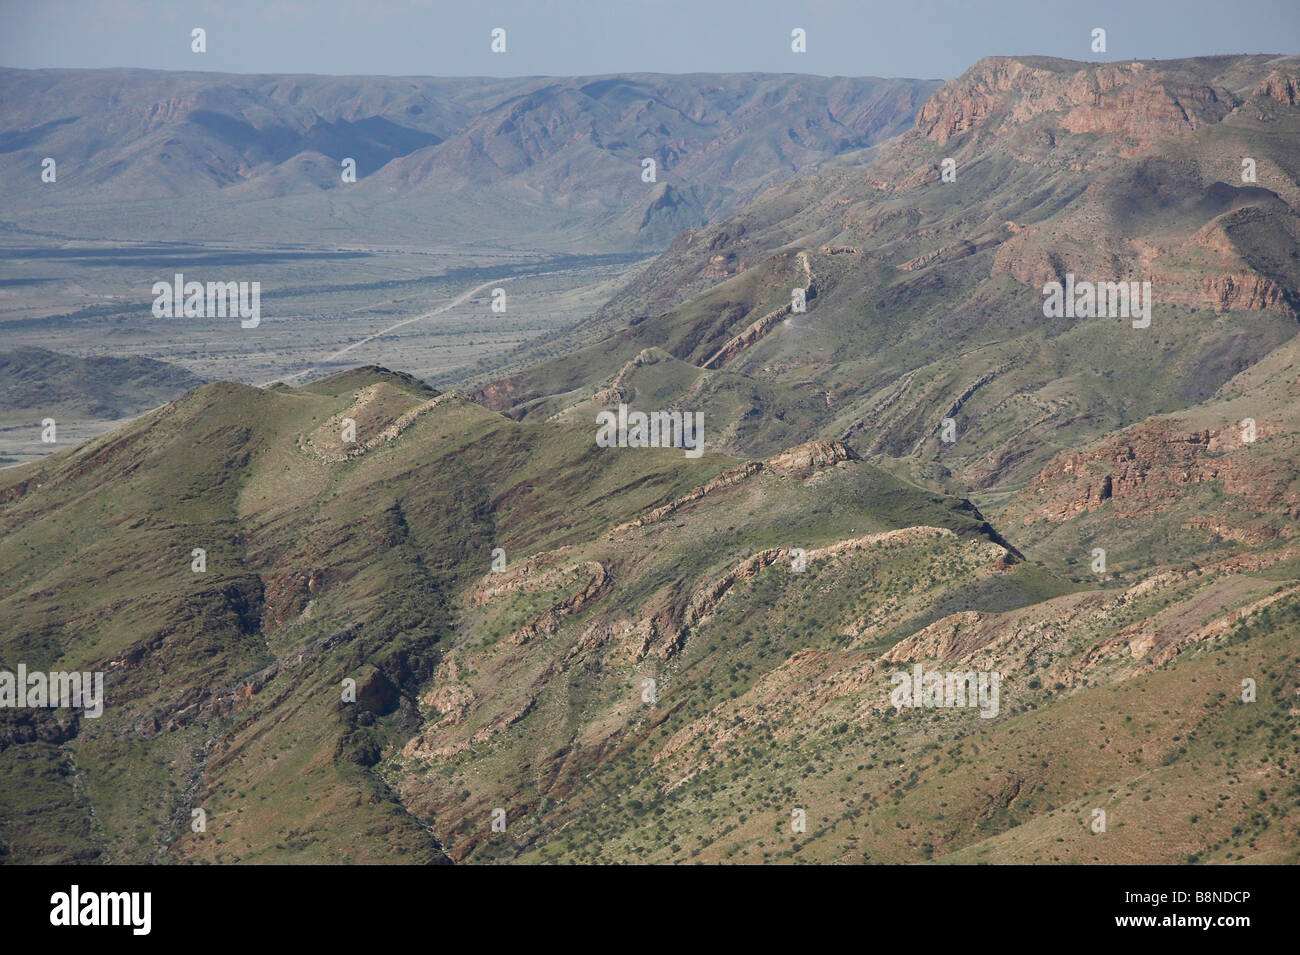 A scenic view of the mountains and valleys of the Naukluft Stock Photo